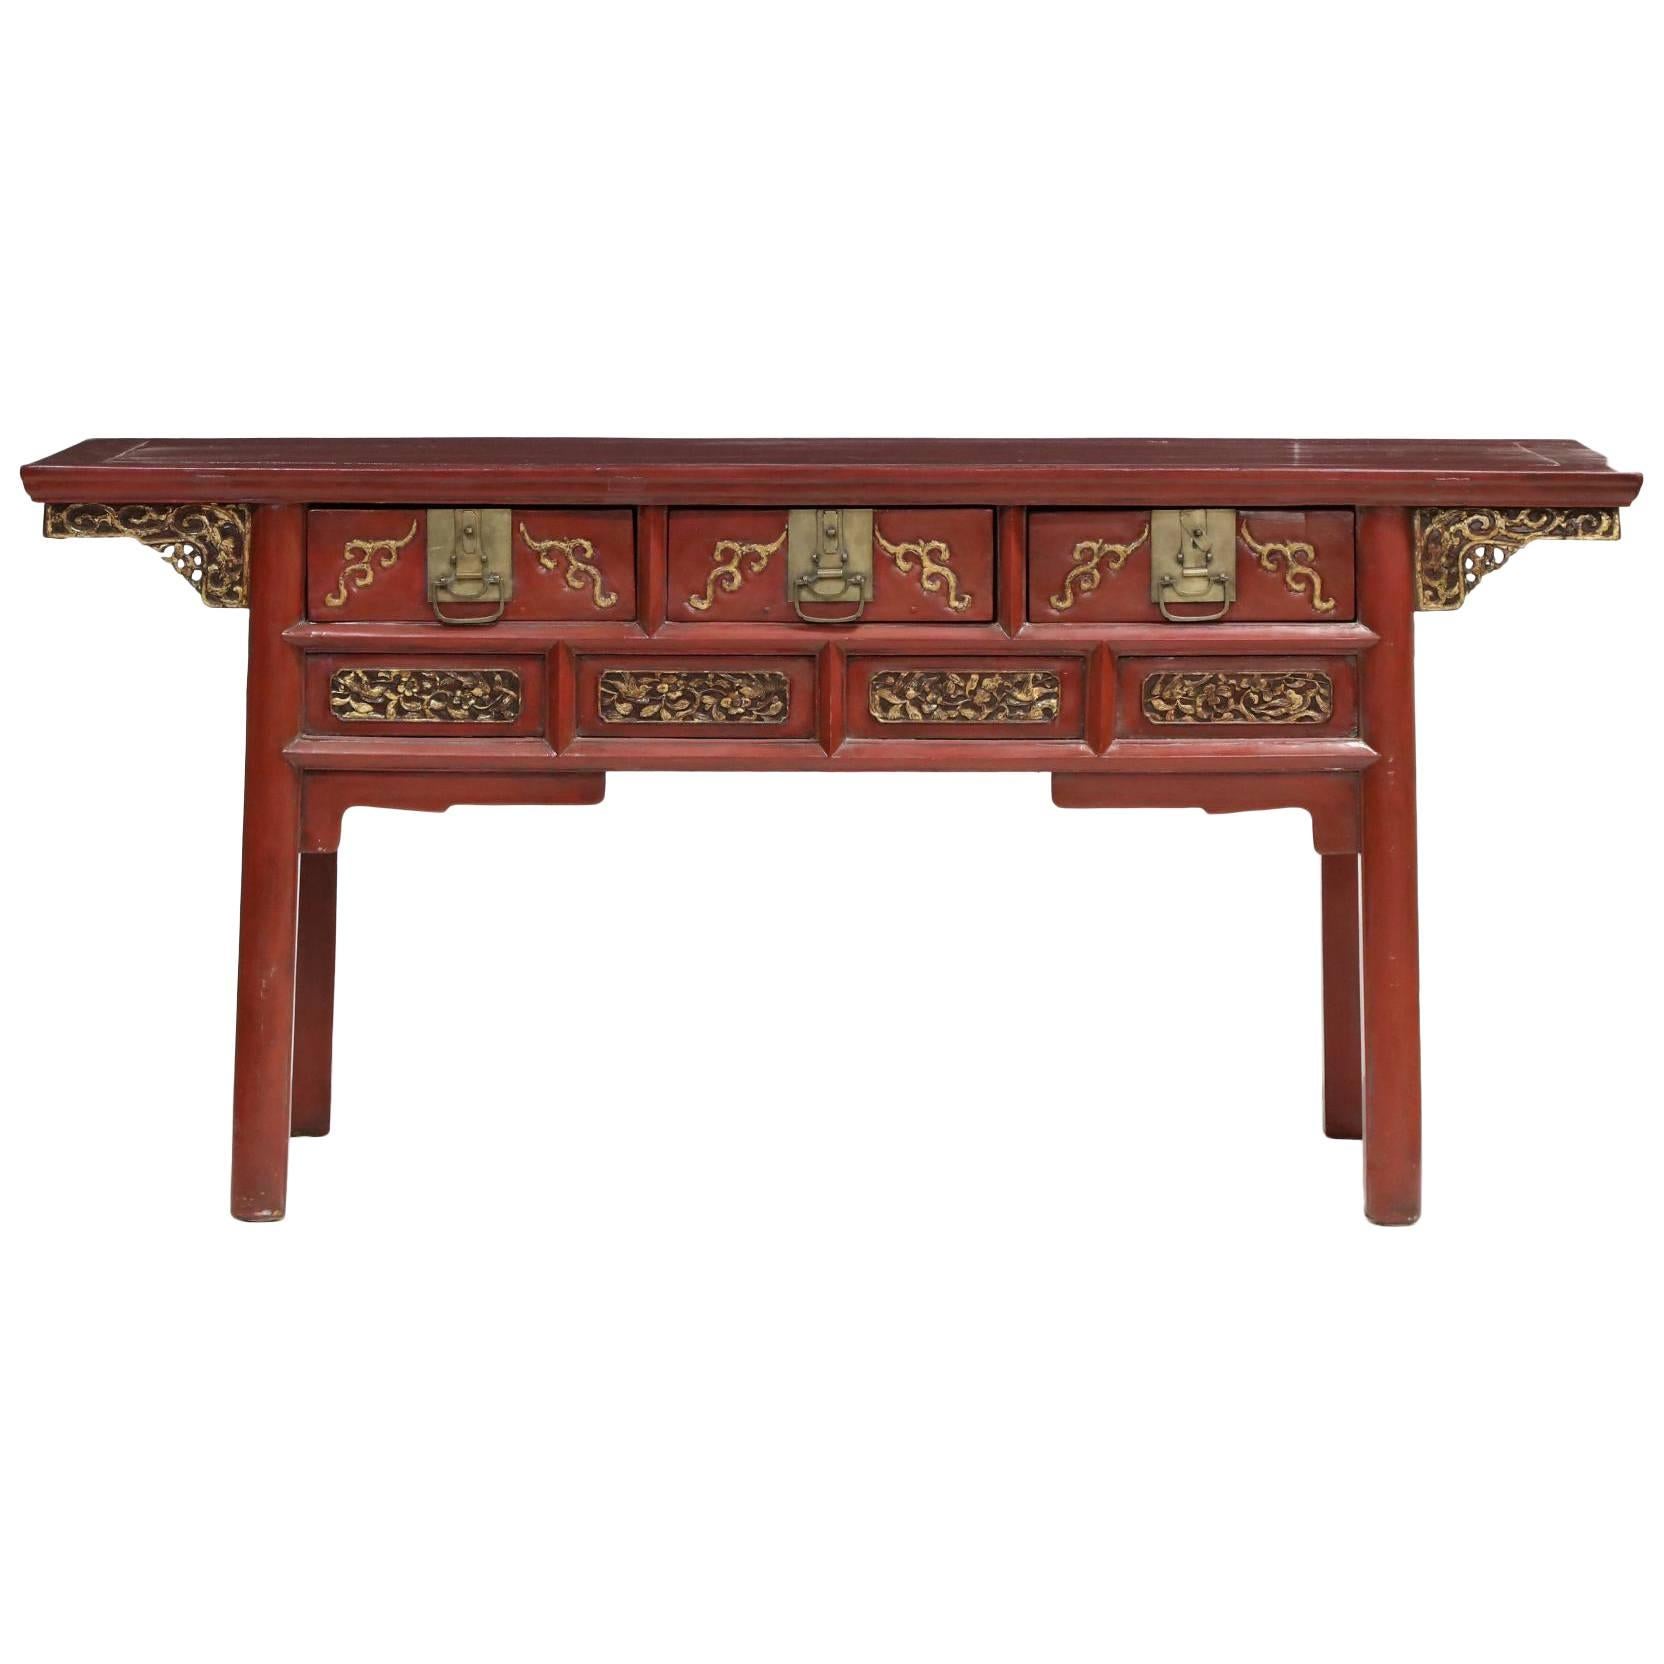 Chinese 19th Century Decorated Alter Table For Sale